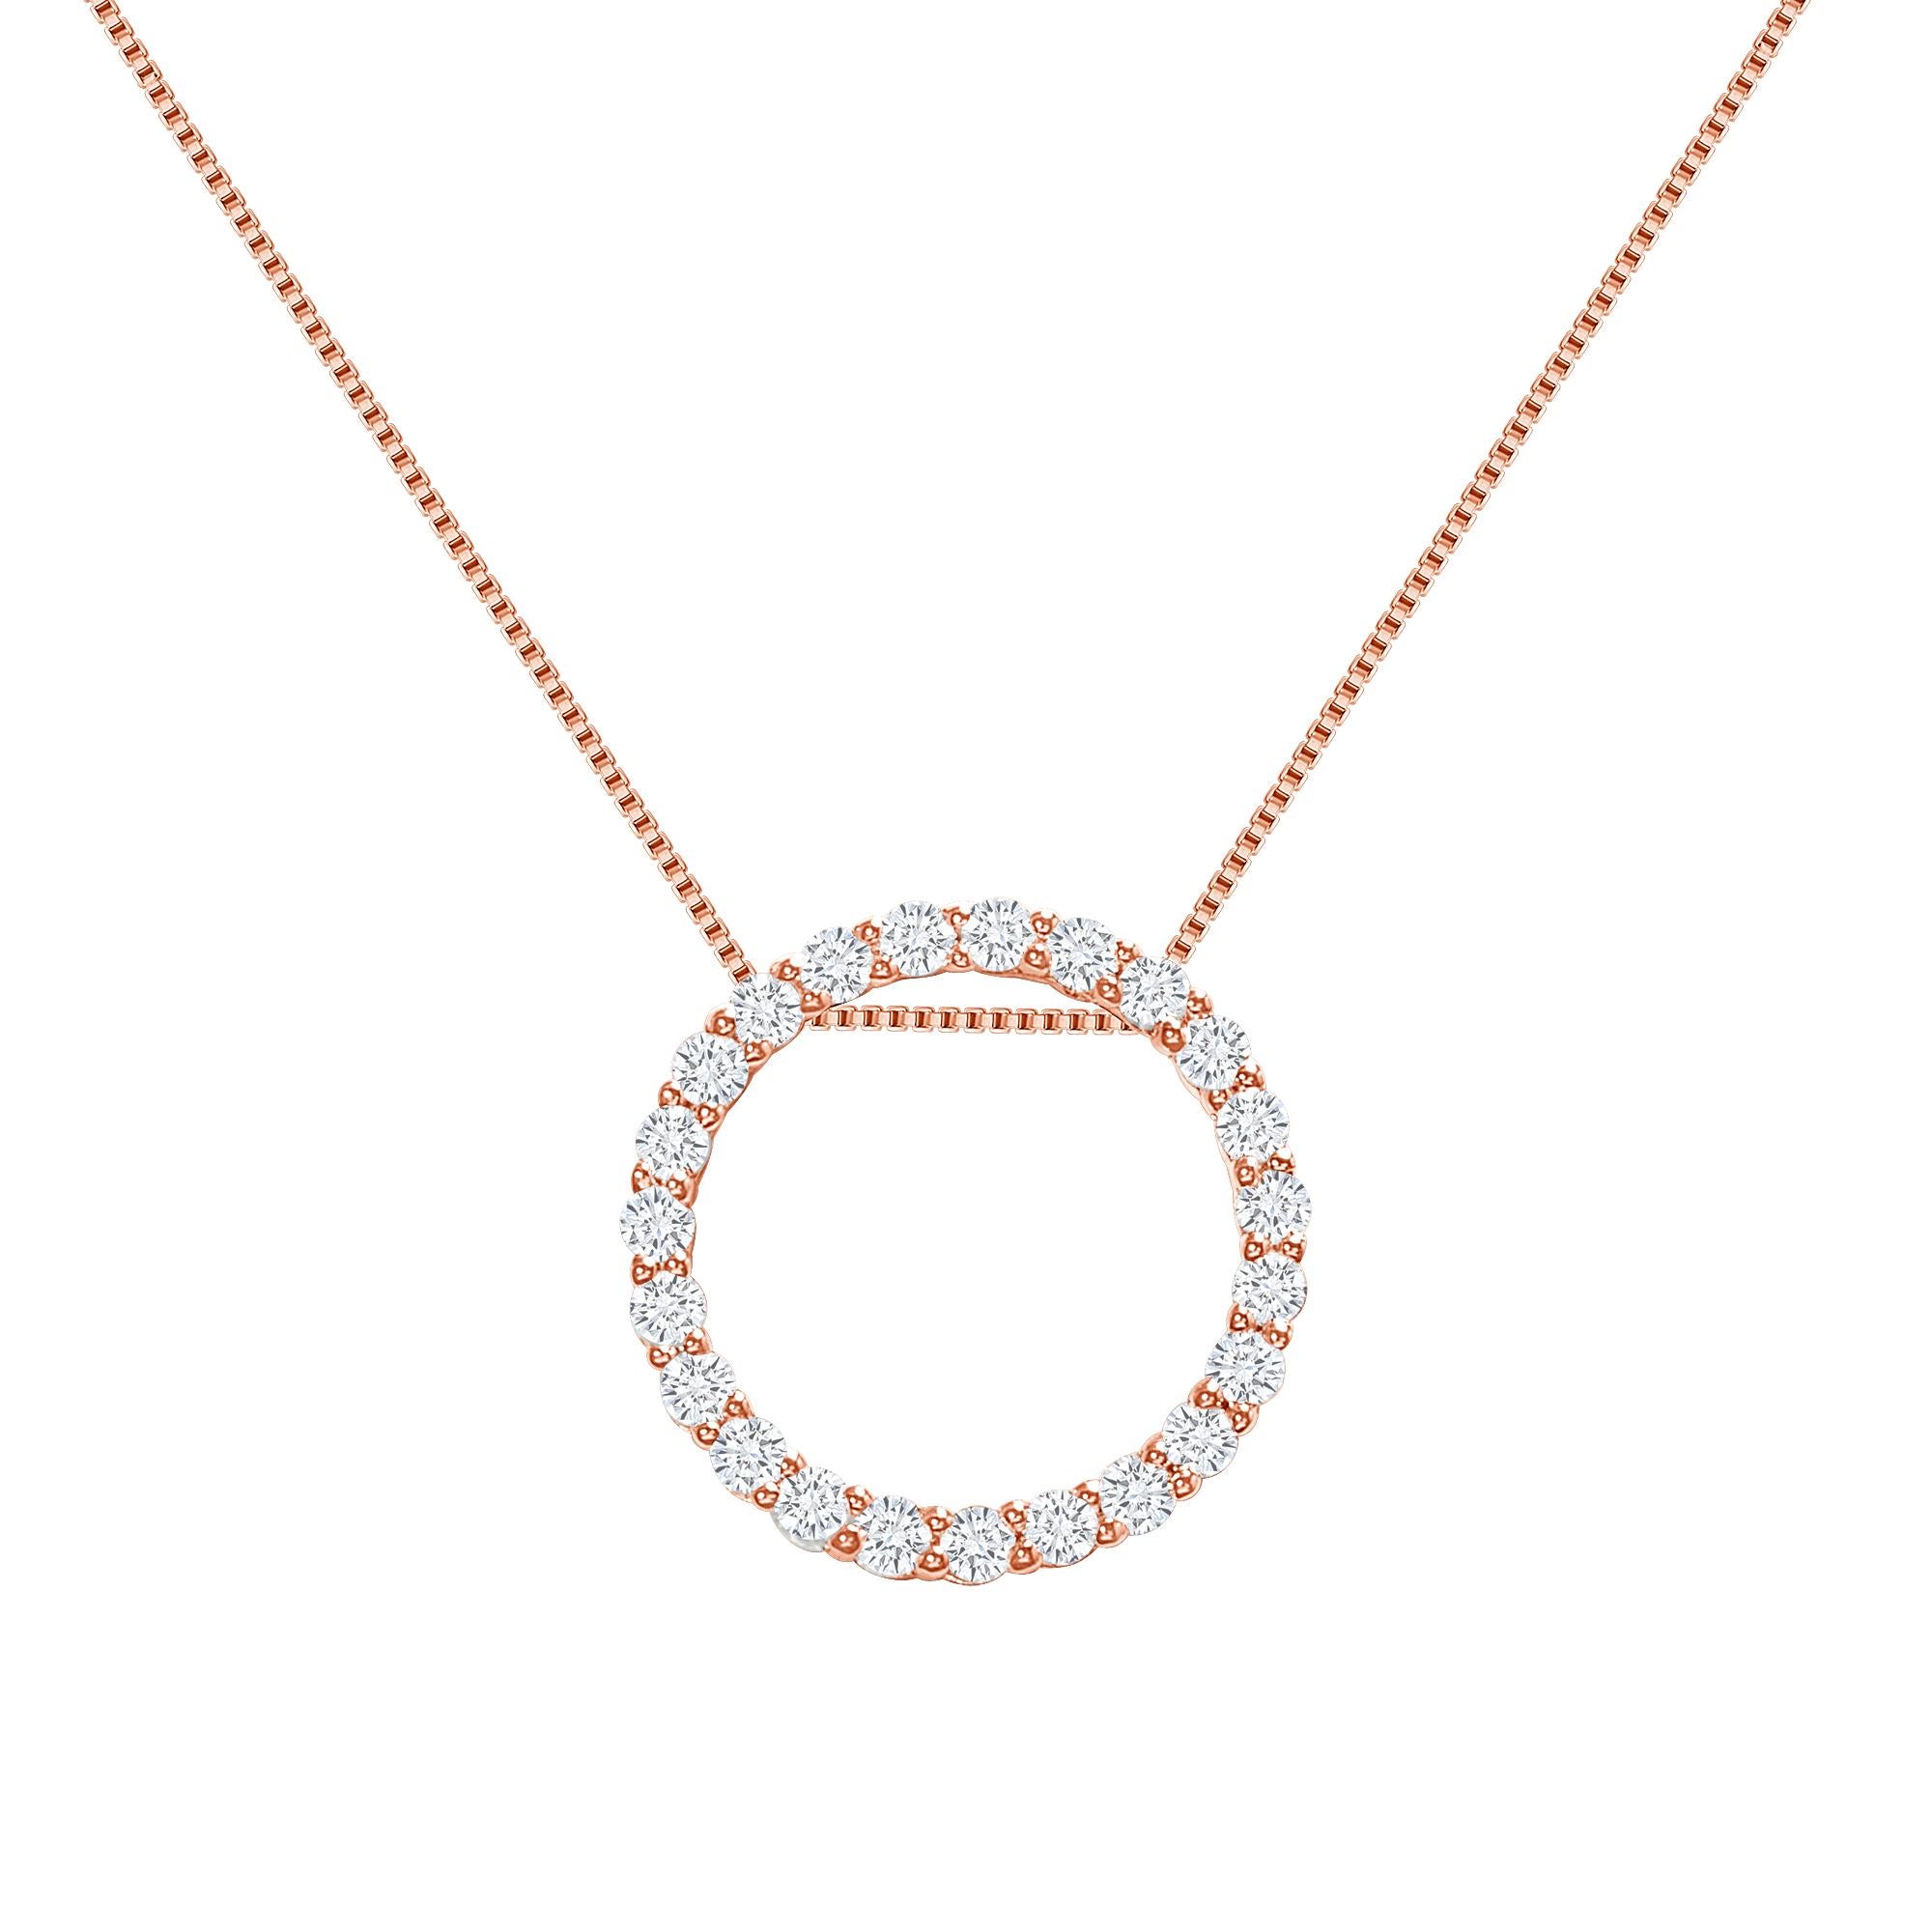 This diamond circle pendant provides a glowing chic look.
Metal: 14k Gold
Diamond Total Carats: 2 carat
Diamond Cut: Round Natural Diamonds (Not Lab Grown)
Diamond Clarity: VS
Diamond Color: F-G
Color: Rose Gold
Necklace Length: 20 inches